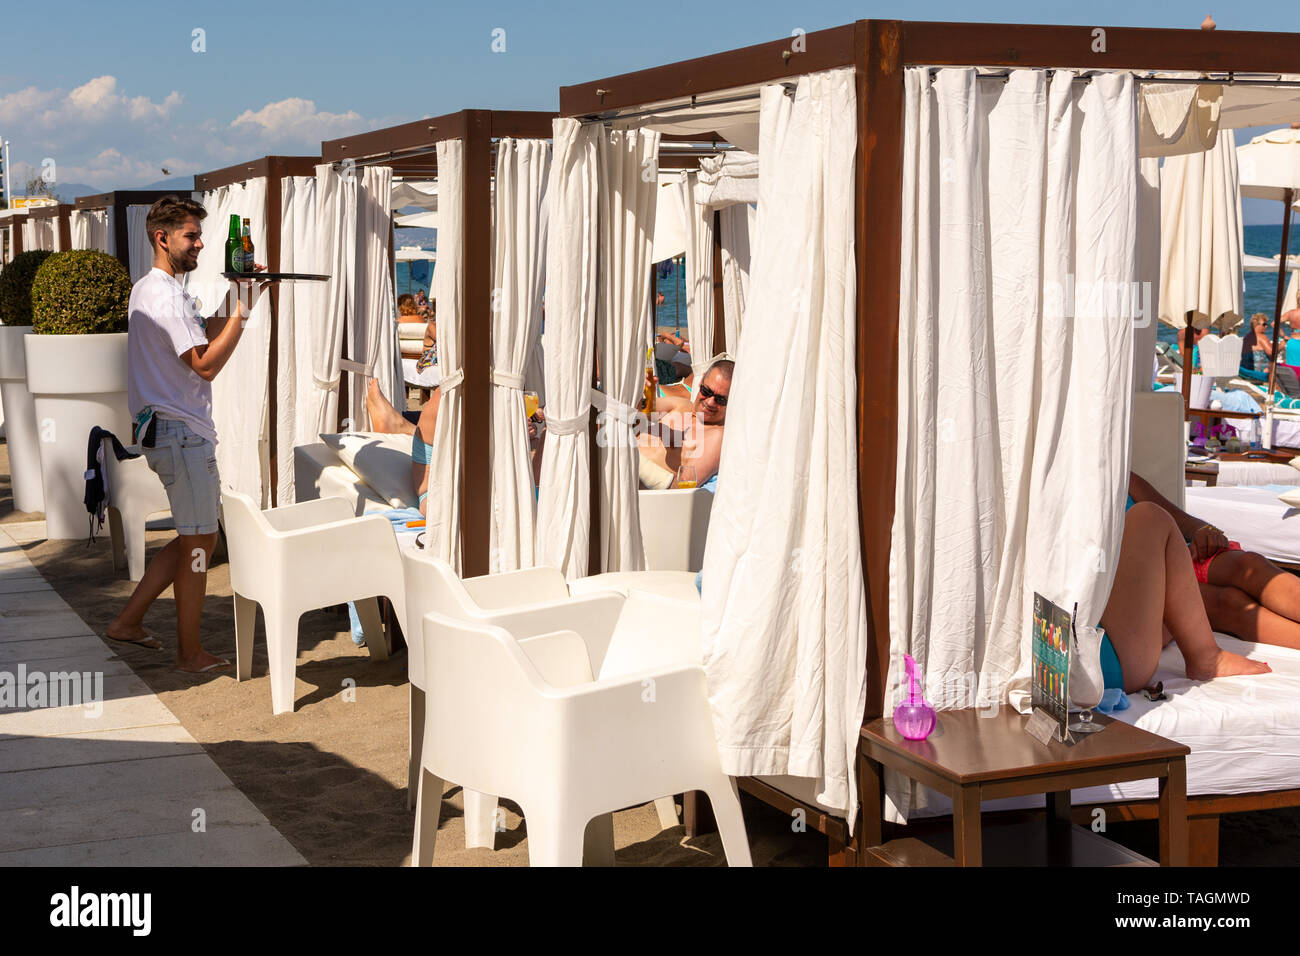 Waiter in white serving customers on white high-end bed-like sun loungers on the beach, Playa Miguel, La Carihuela, Torremolinos, Costa Del Sol, Spain Stock Photo